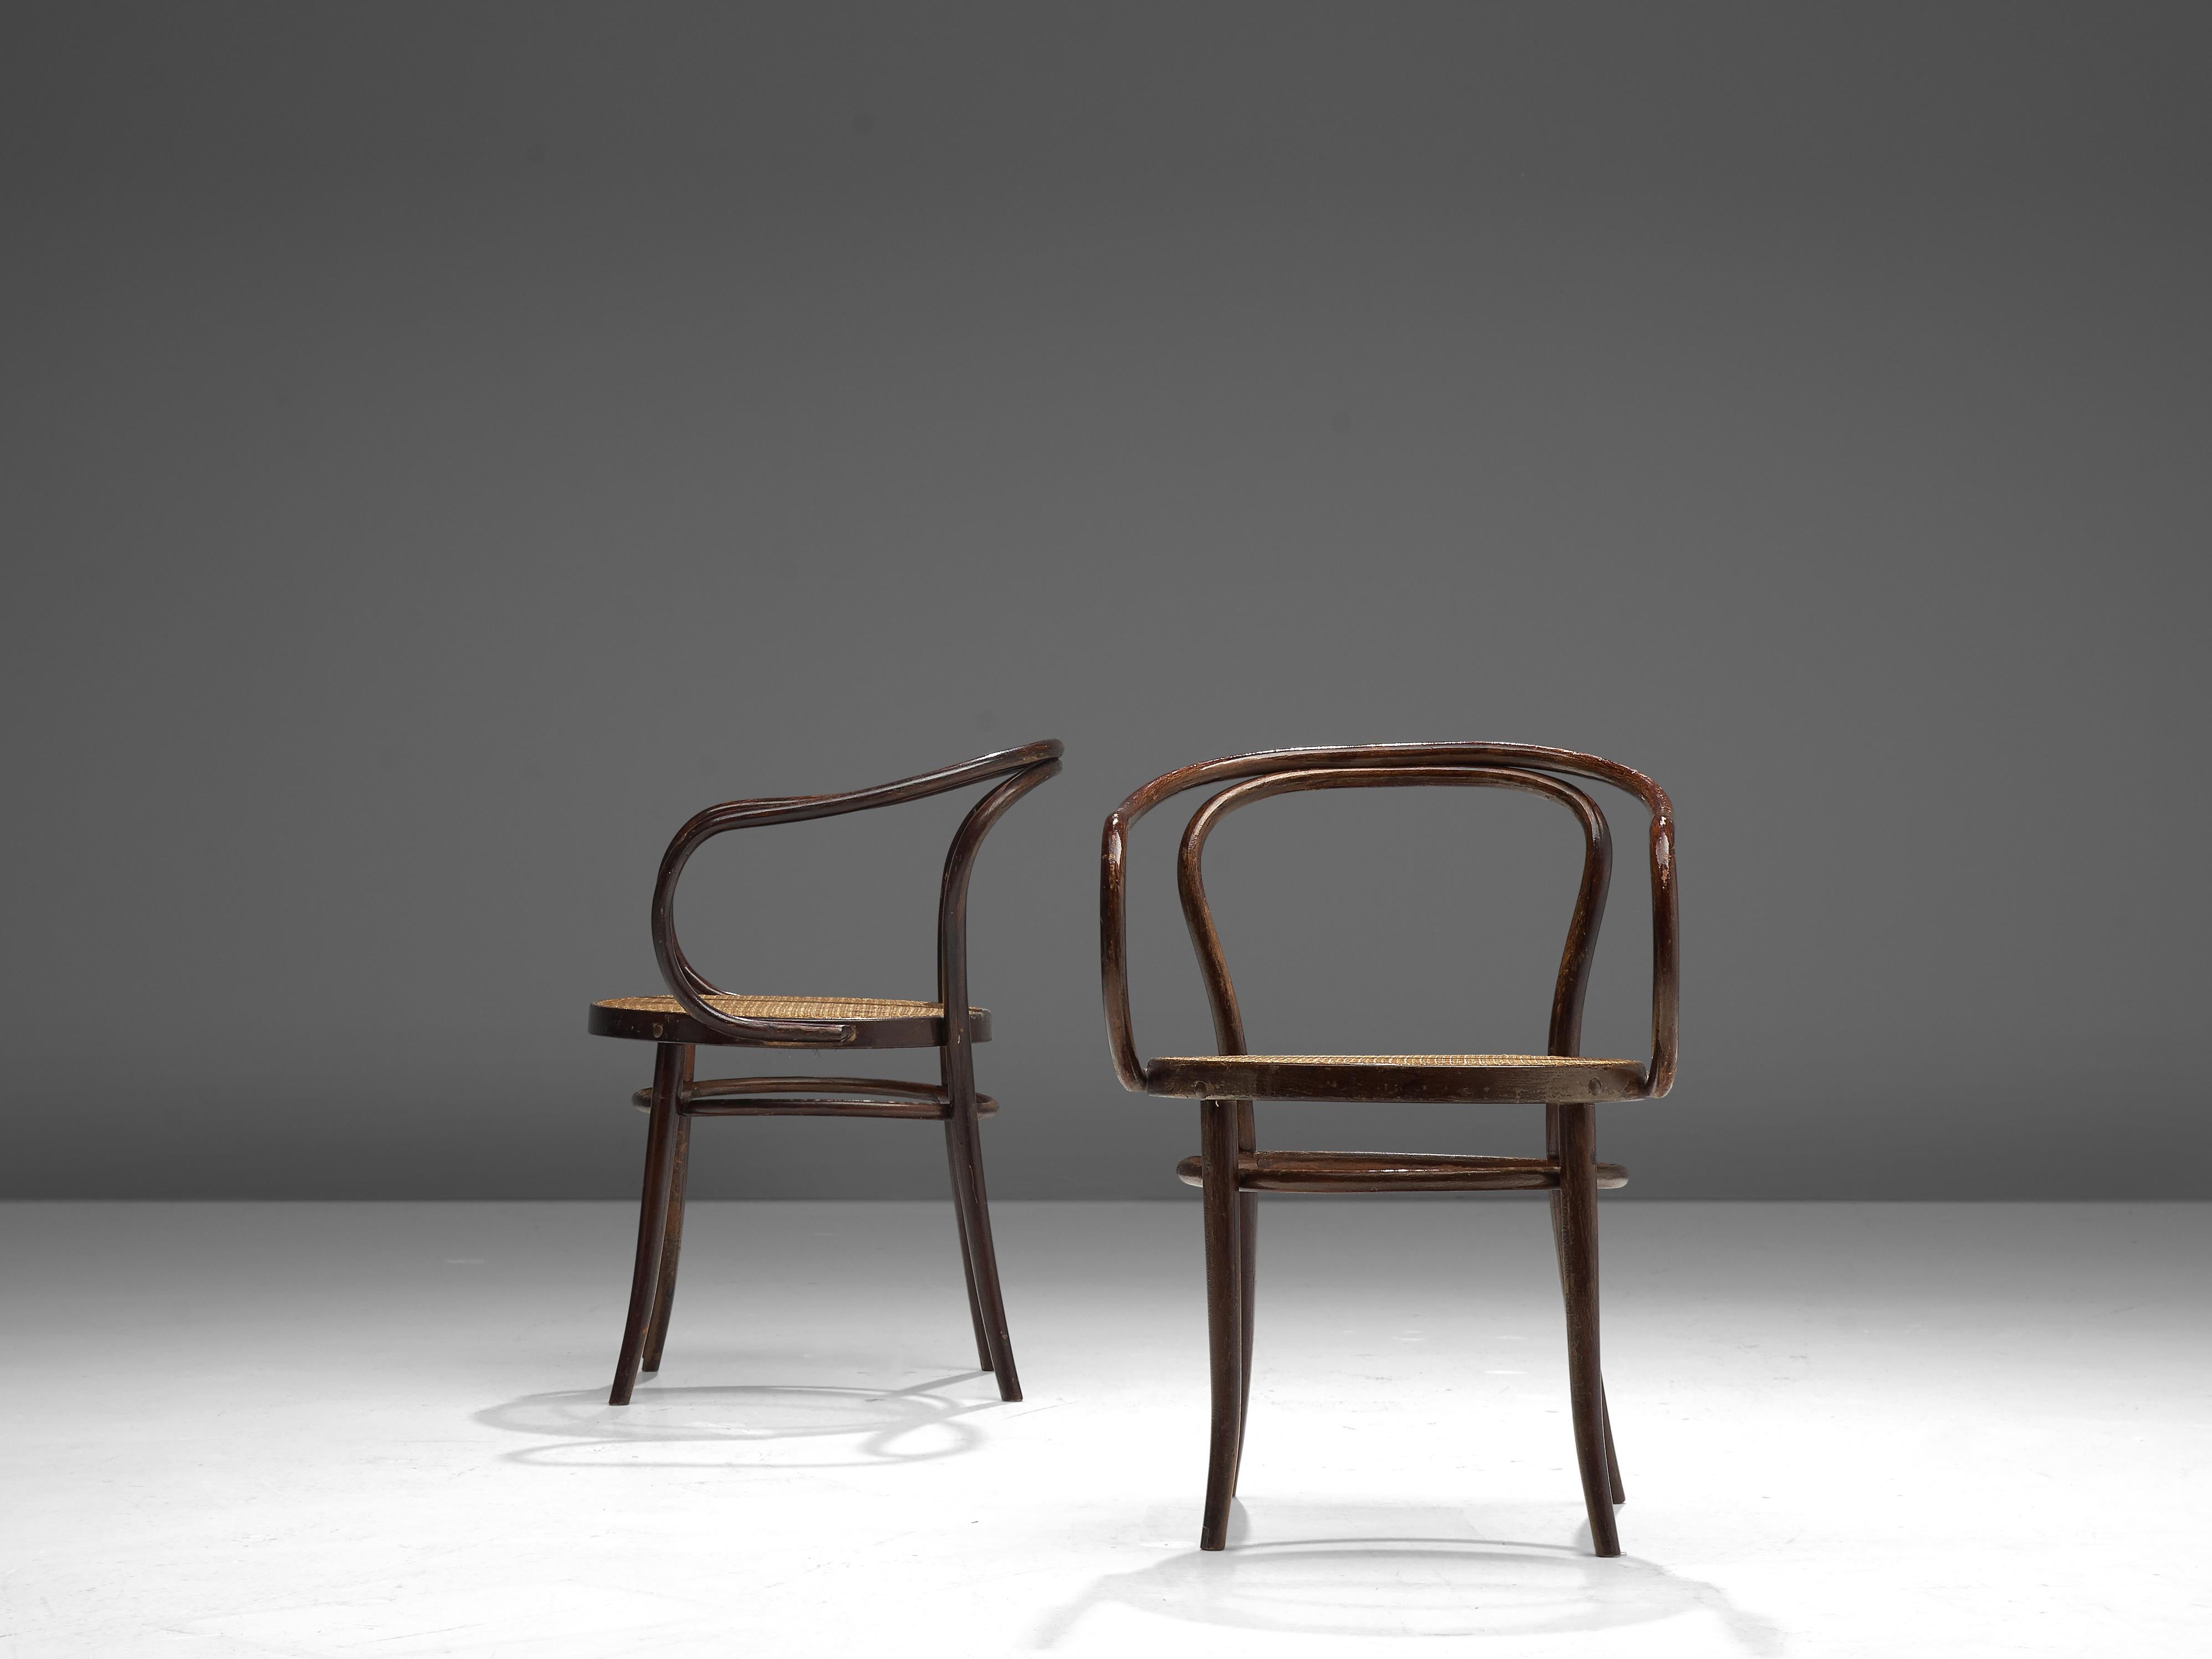 Designed by Thonet, manufactured Ton, large set of ‘Vienna’ armchairs, bentwood, plastic, Czech Republic, design 1902/03, manufactured 1960s

The ‘Vienna Chair’ model 9 was designed by Thonet in 1902/03. They were presented in 1925 at Exposition